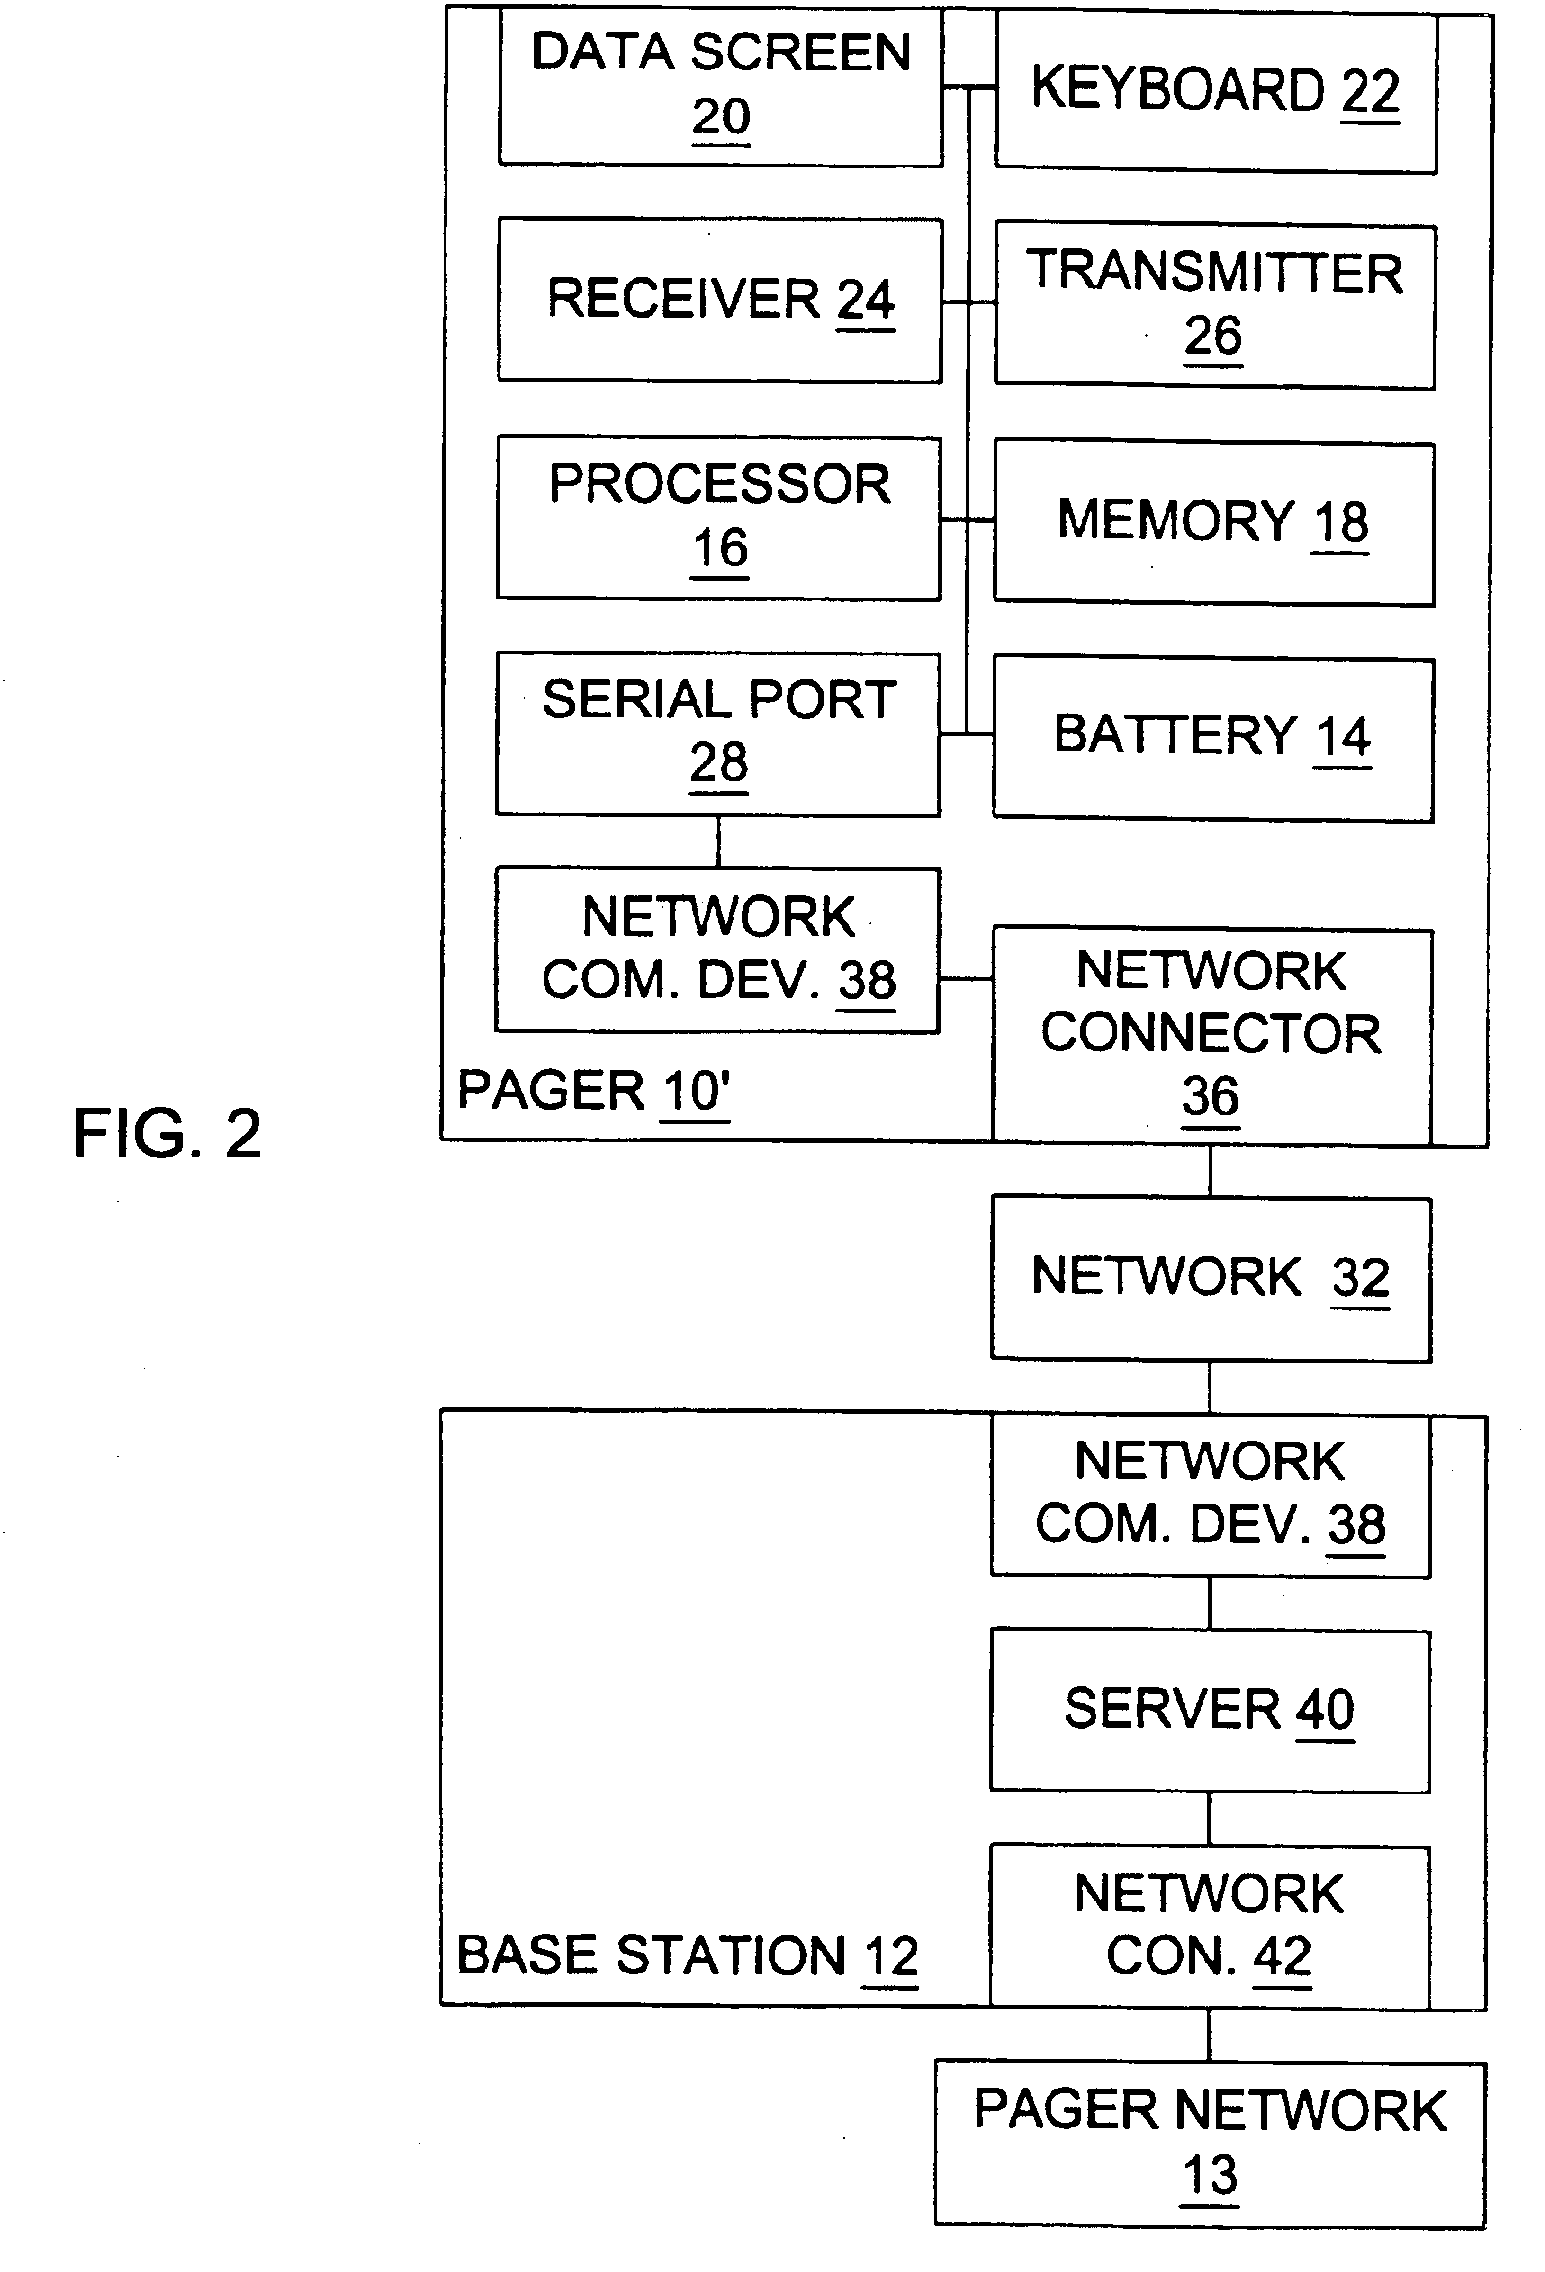 Method of coupling portable communications device to first network by way of second network